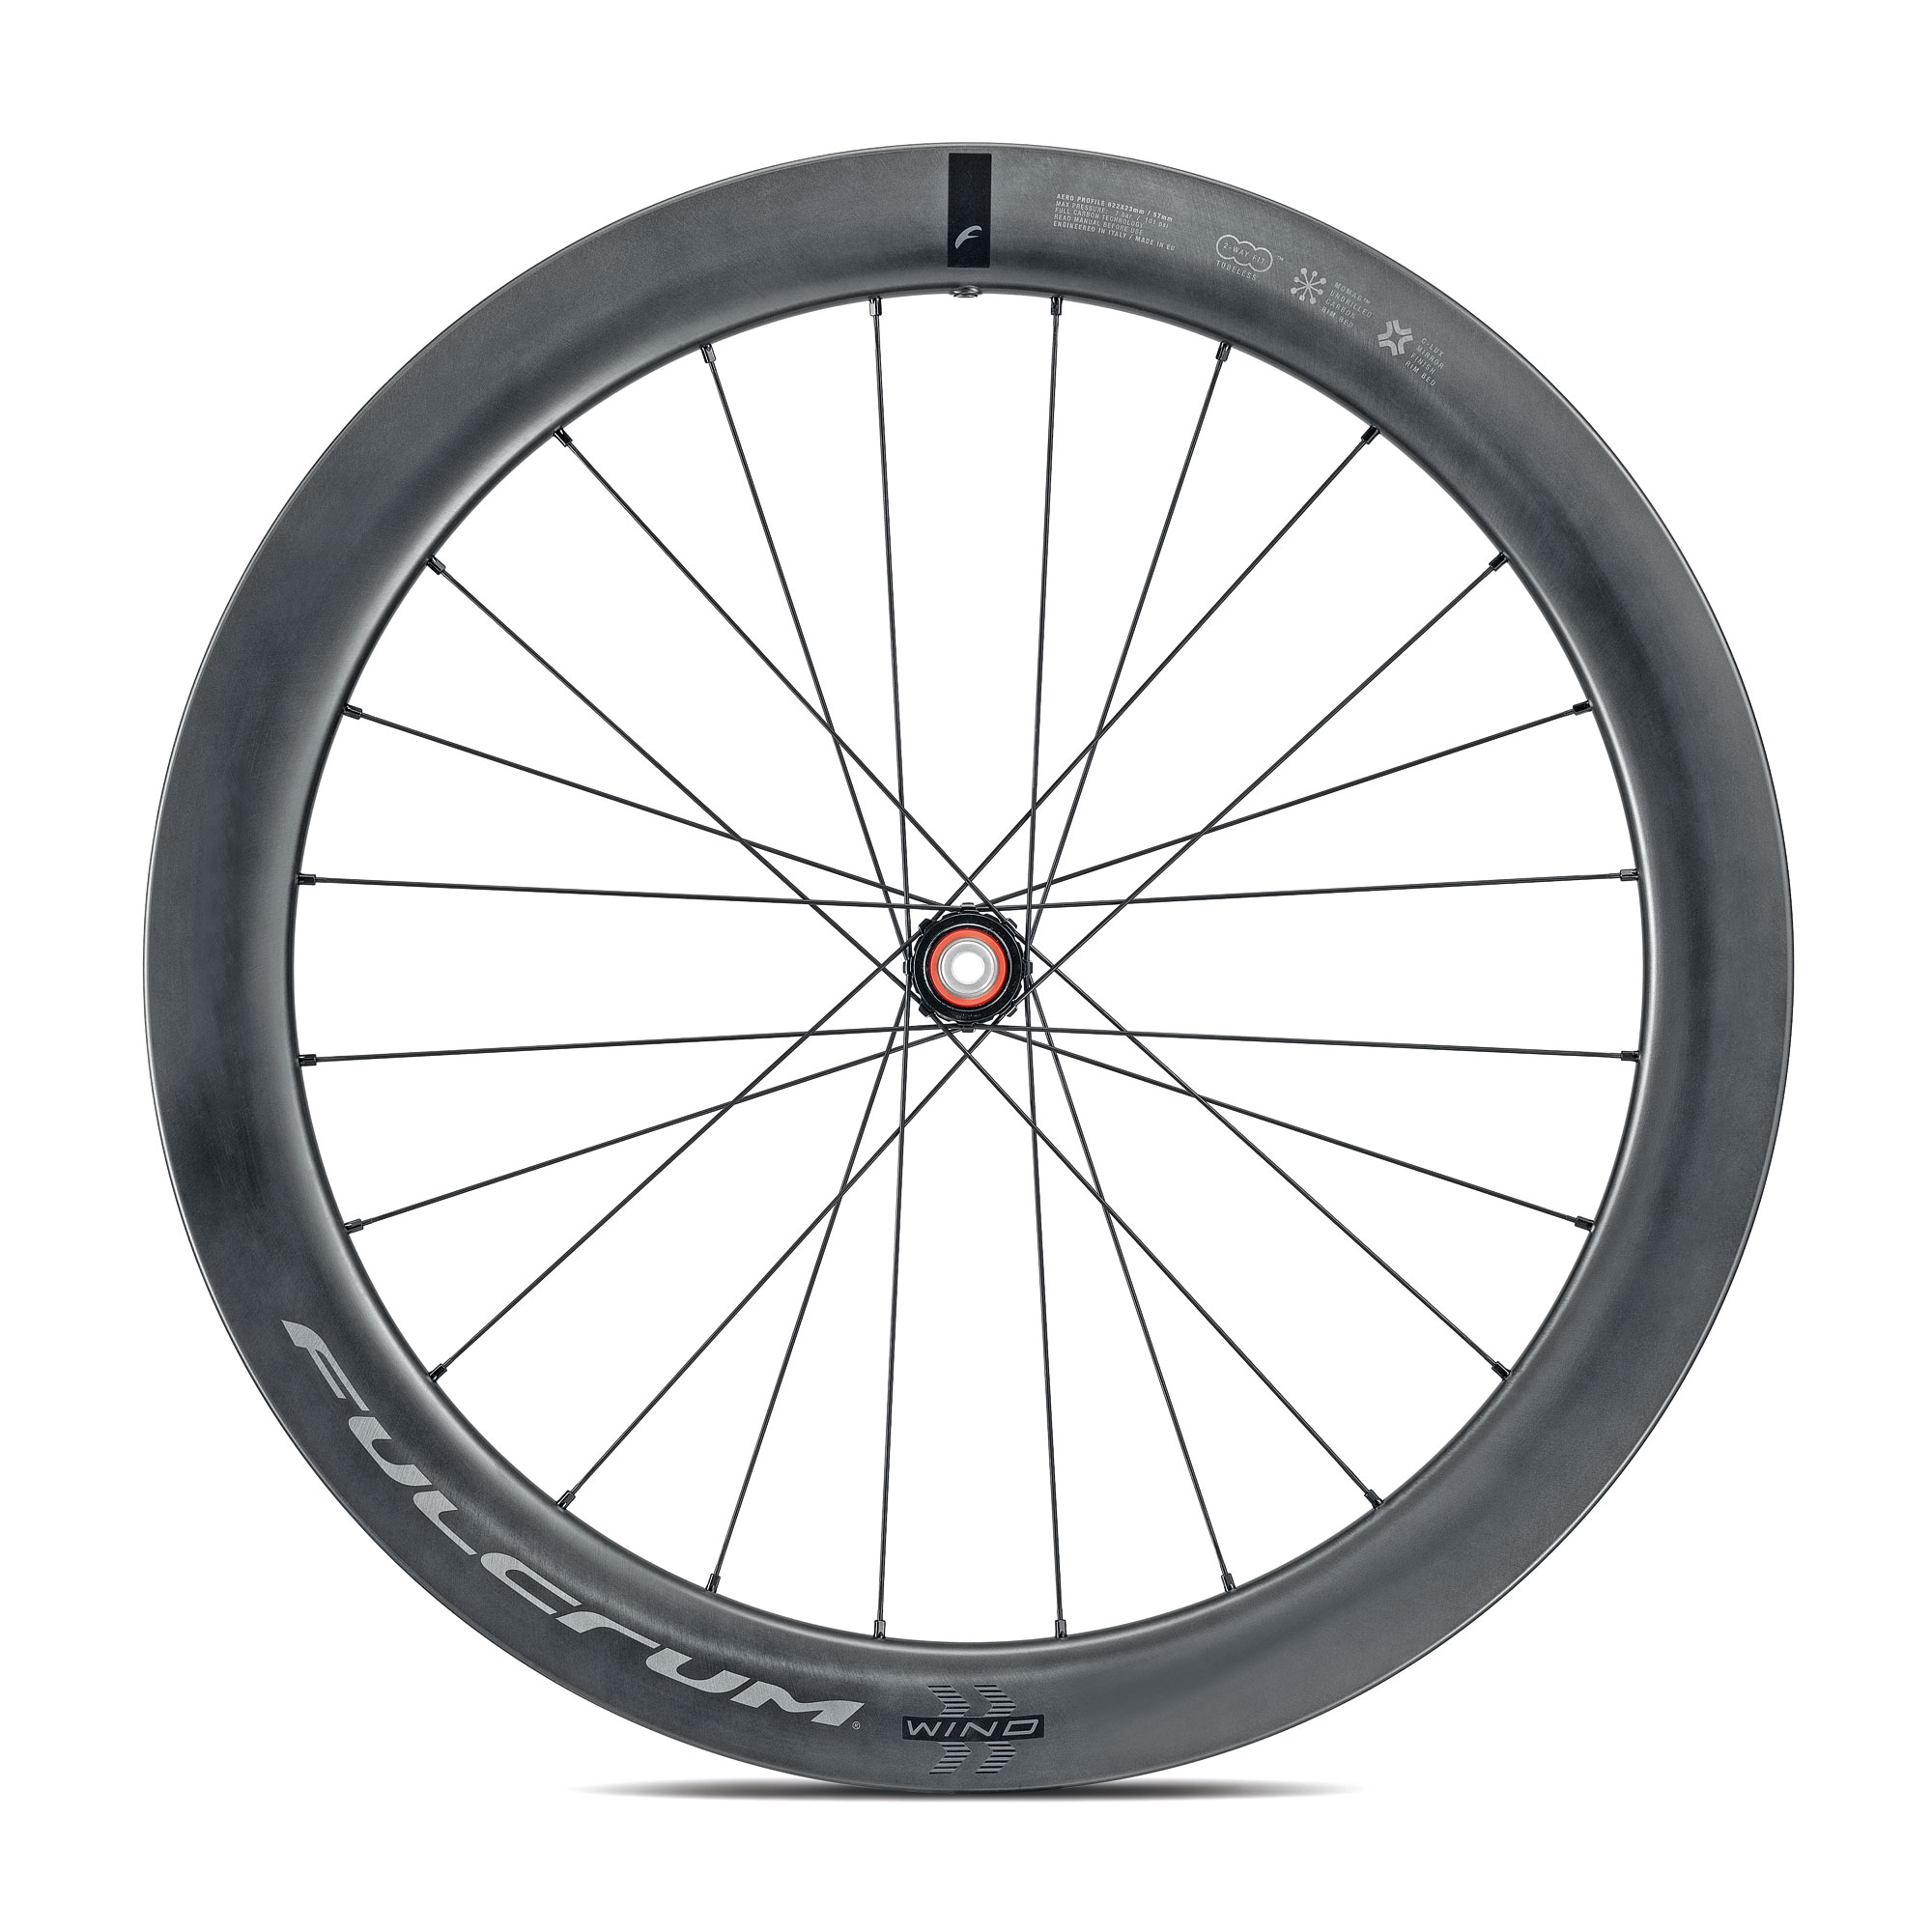 Fulcrum Wind 42mm & 57mm affordable wide European aero carbon all road wheels, 57mm front